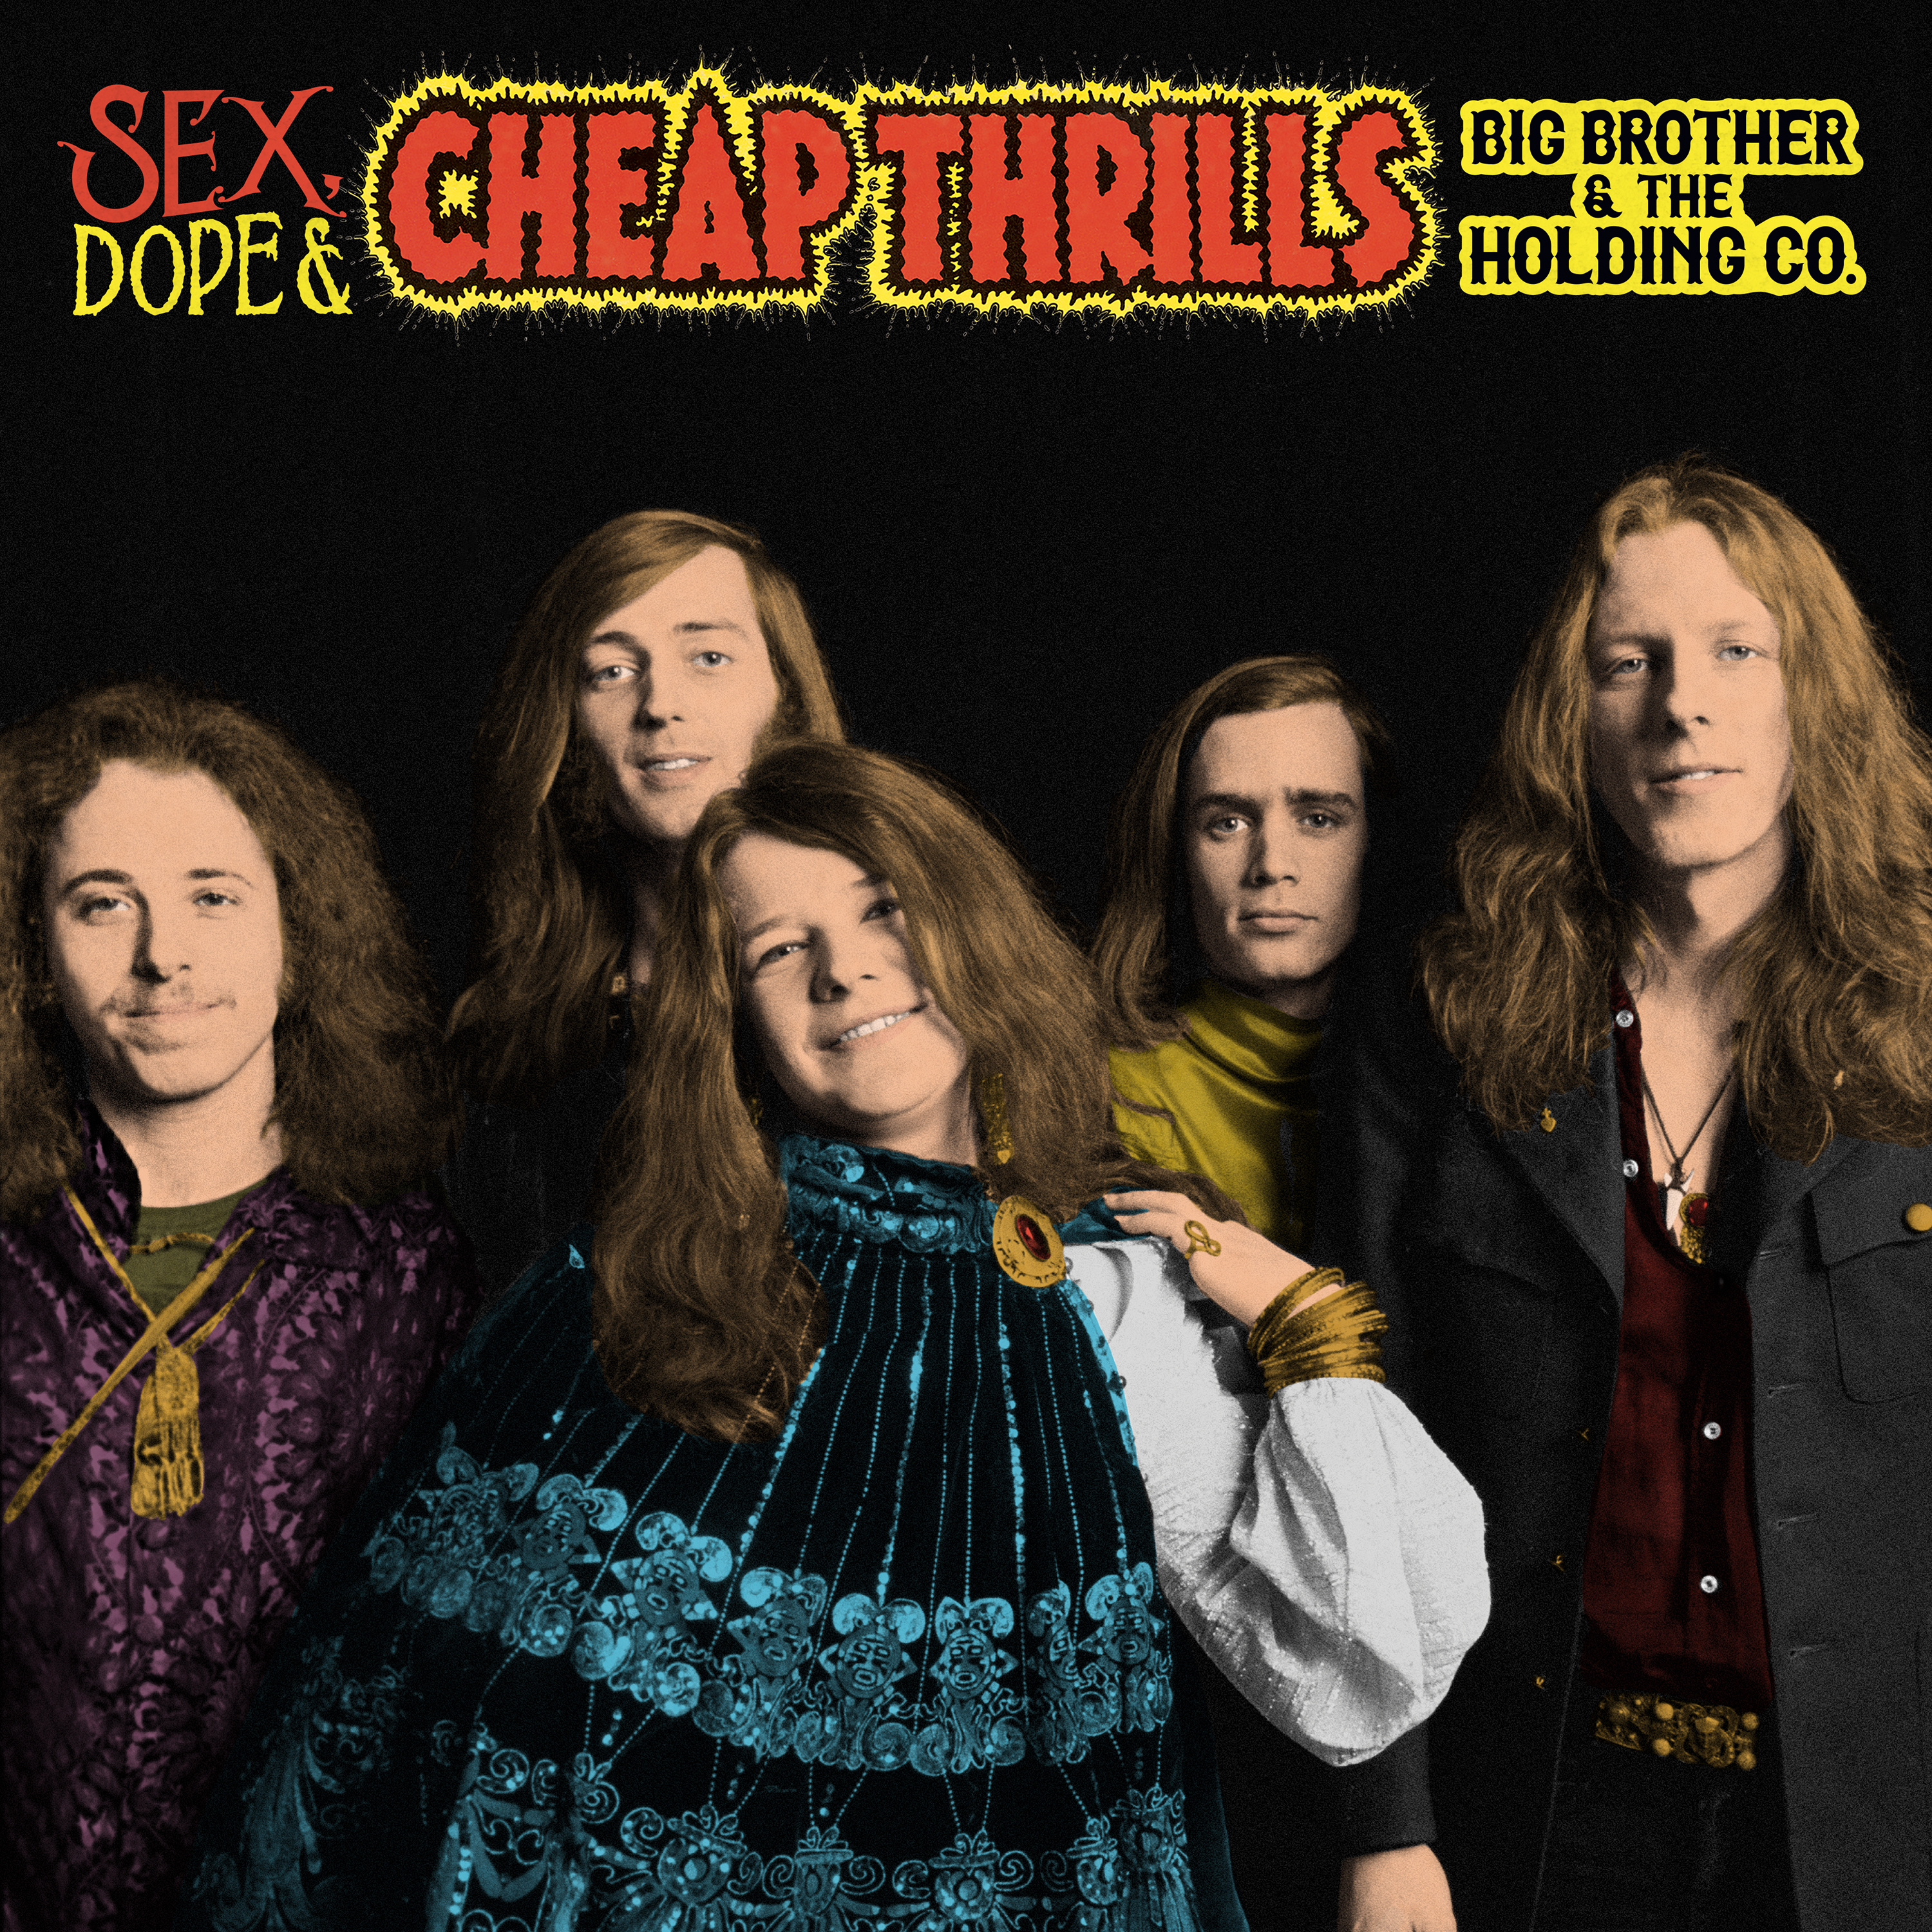 The 2019 Janis Joplin Legacy;   50TH Anniversary of Big Brother & The Holding Company’s Cheap Thrills